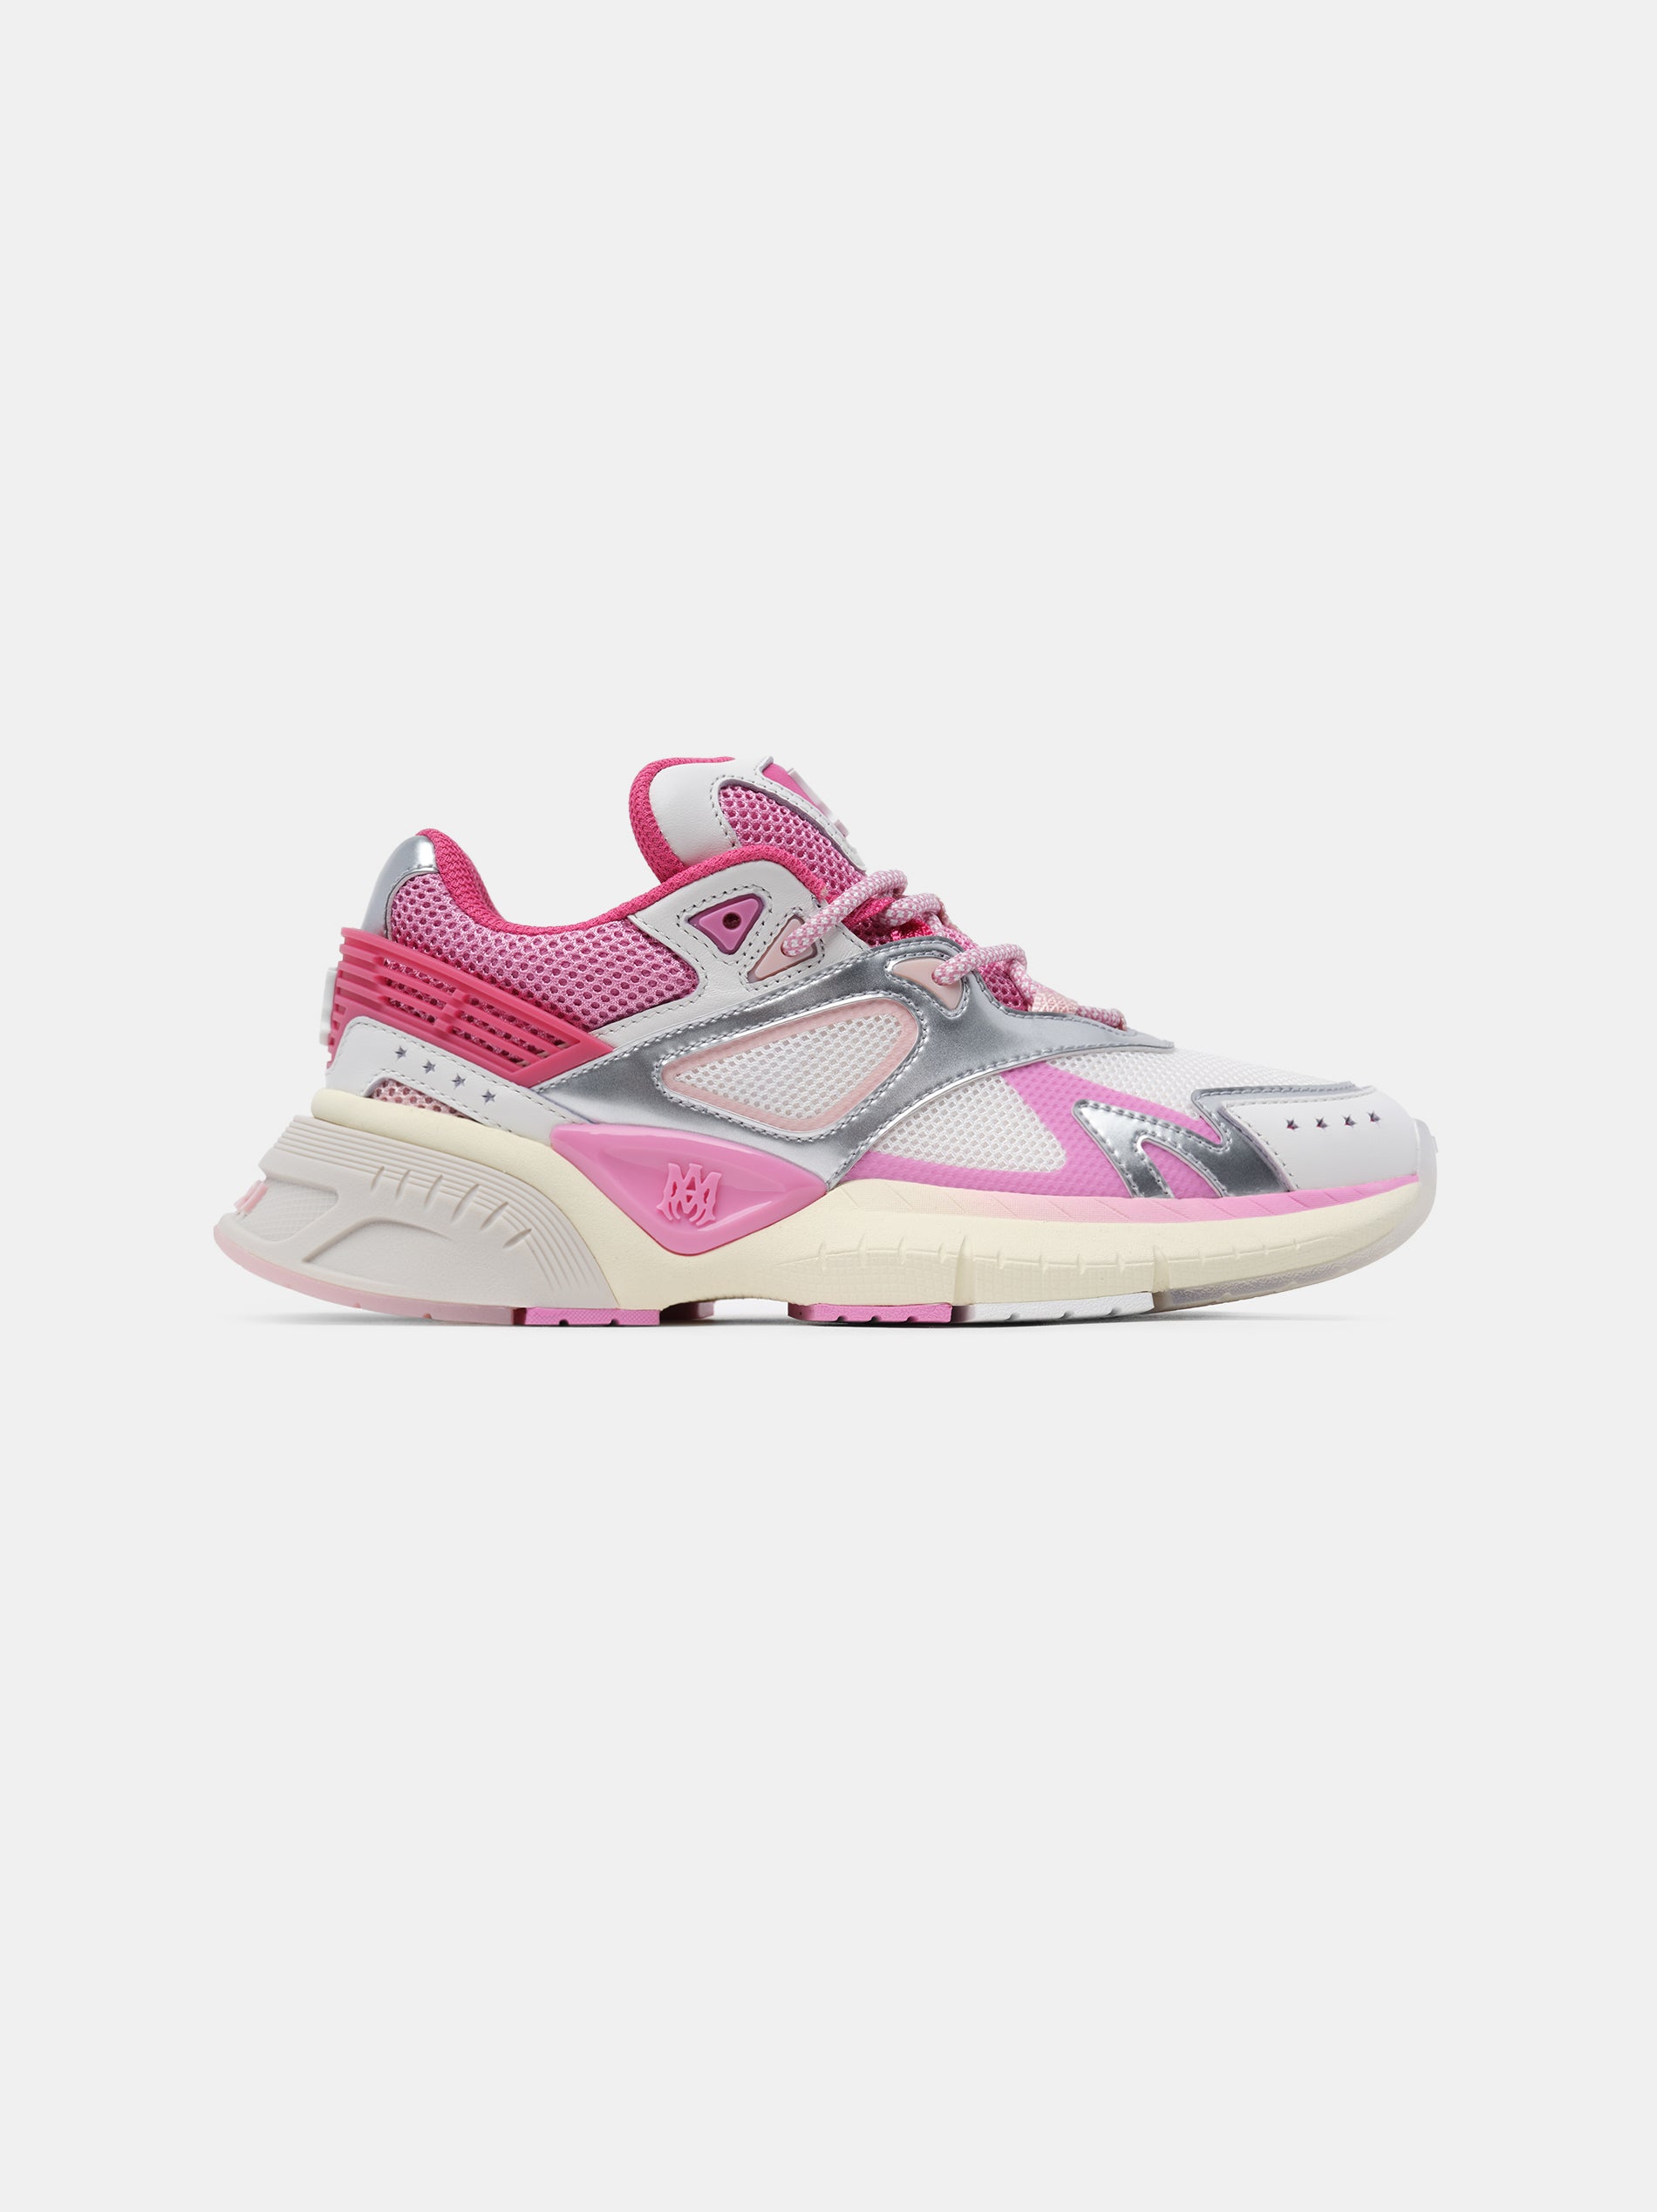 Product WOMEN - MA RUNNER - Fuchsia Pink White Silver featured image